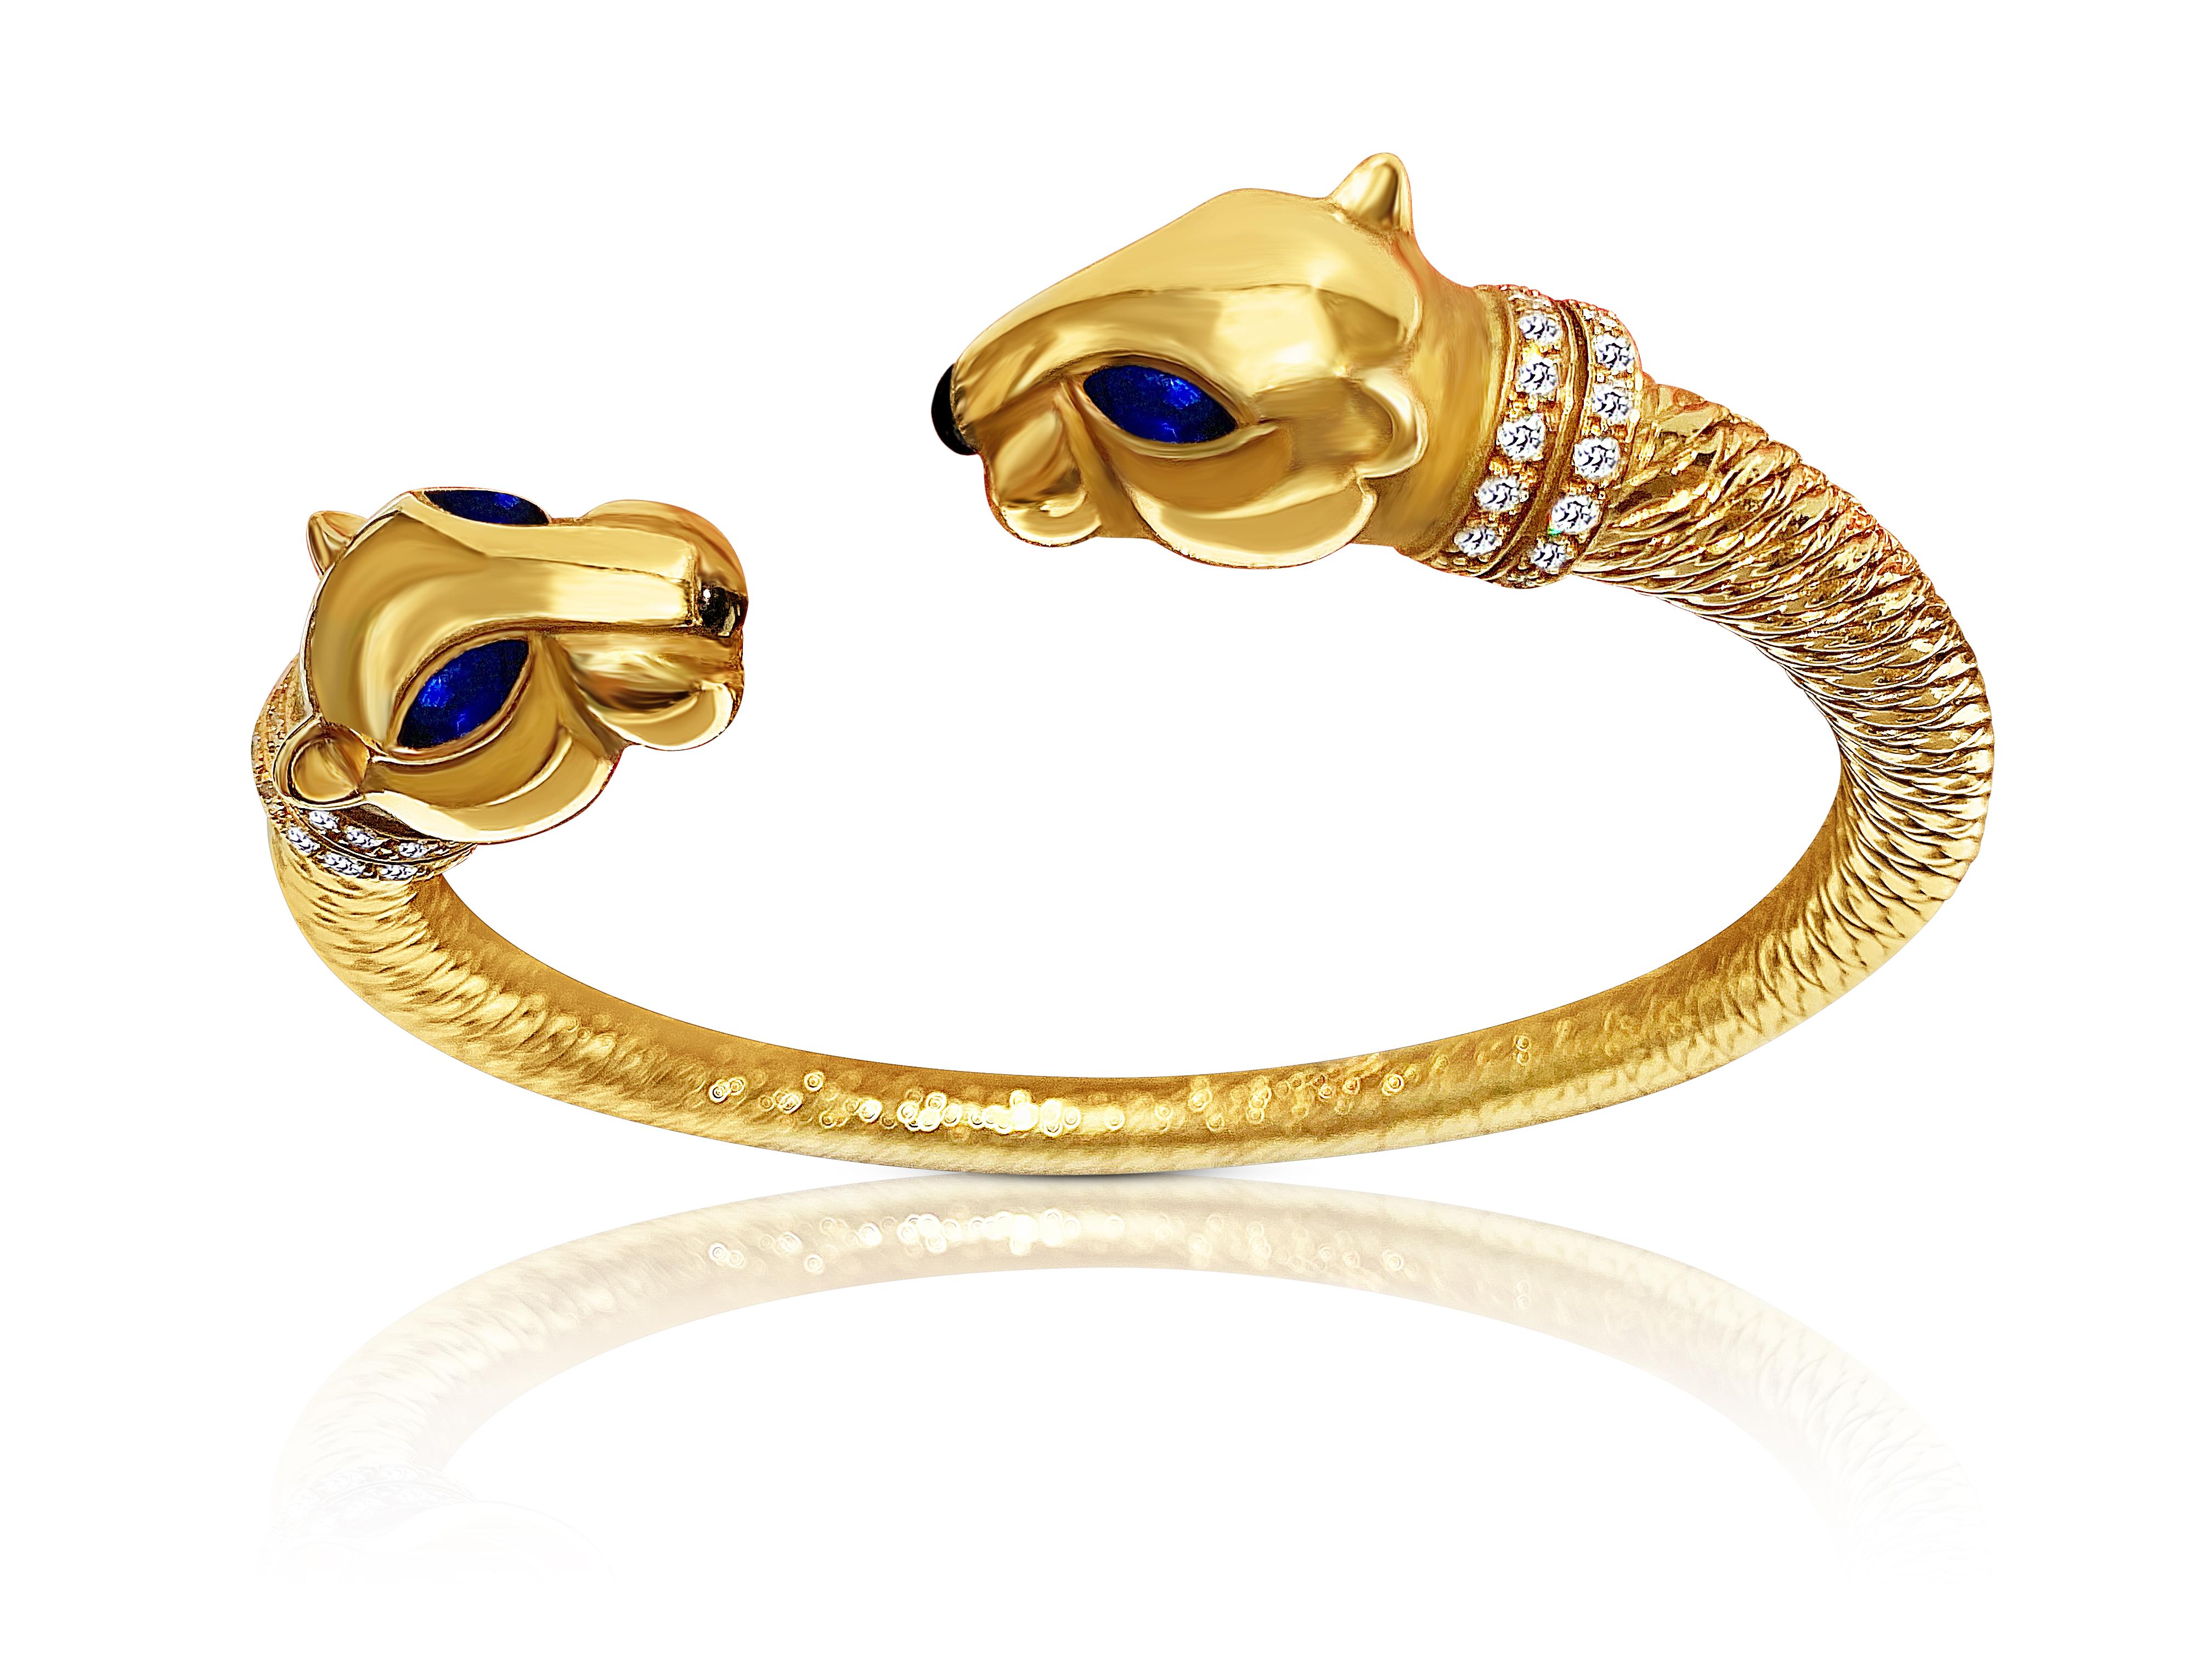 Designed as pair of opposing panthers, set in 18K Yellow Gold and accented by round-brilliant cut diamonds, with Cabochon-Cut Onyx noses, and completed by Marquis-Cut Blue Sapphire eyes. Signed Cartier, numbered #639714, with French assay and